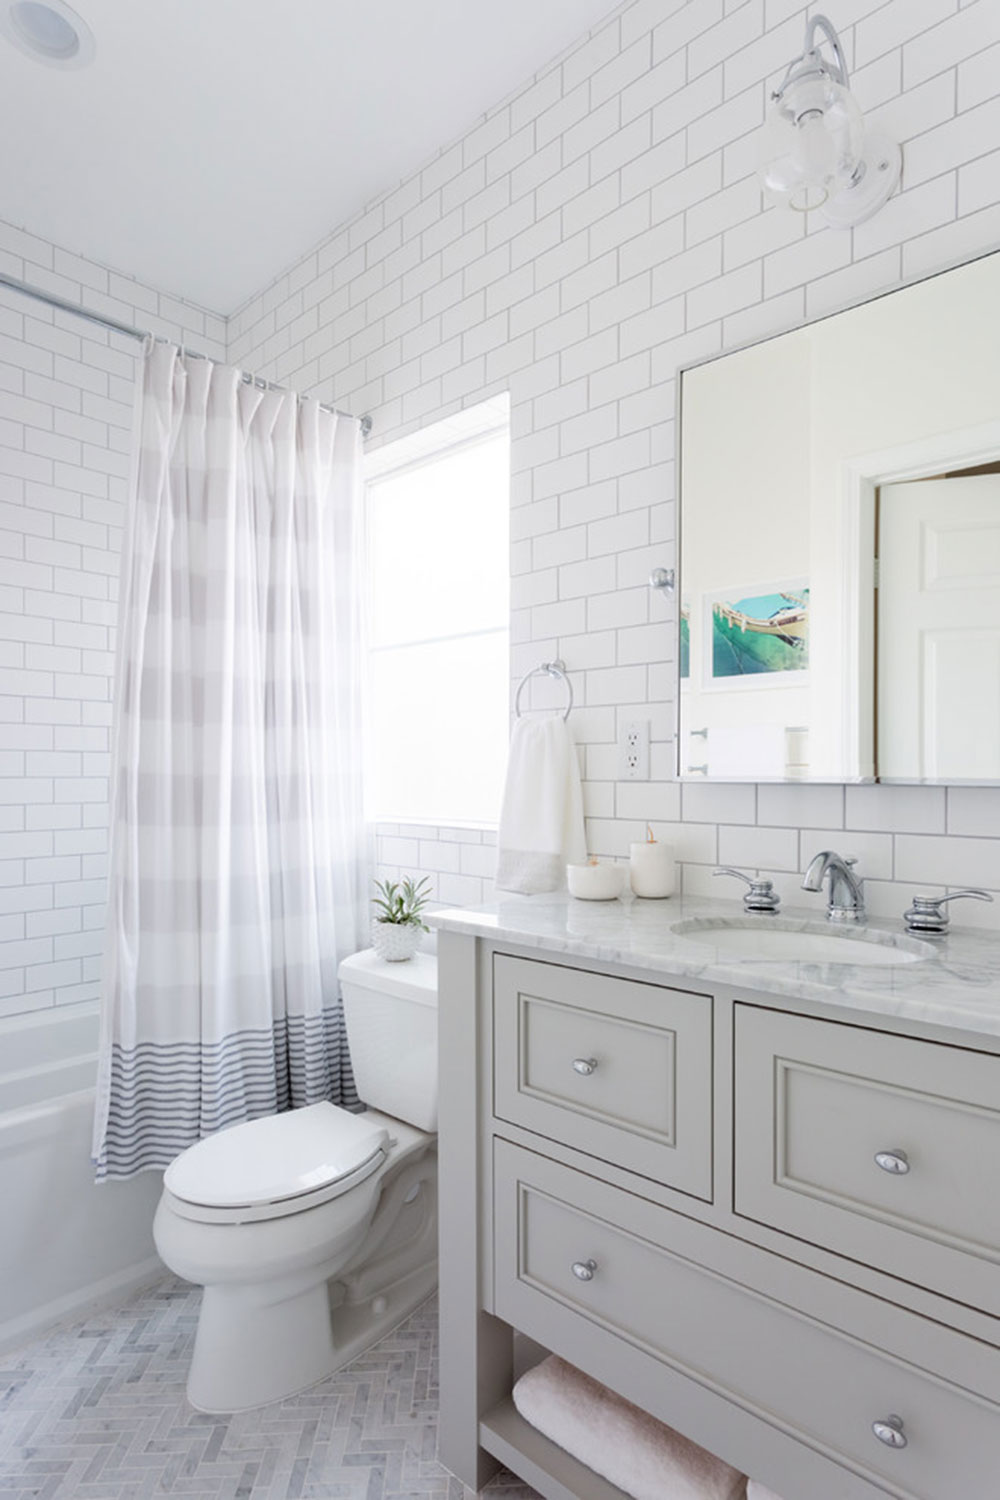 The Definitive Guide On How To Decorate A Bathroom